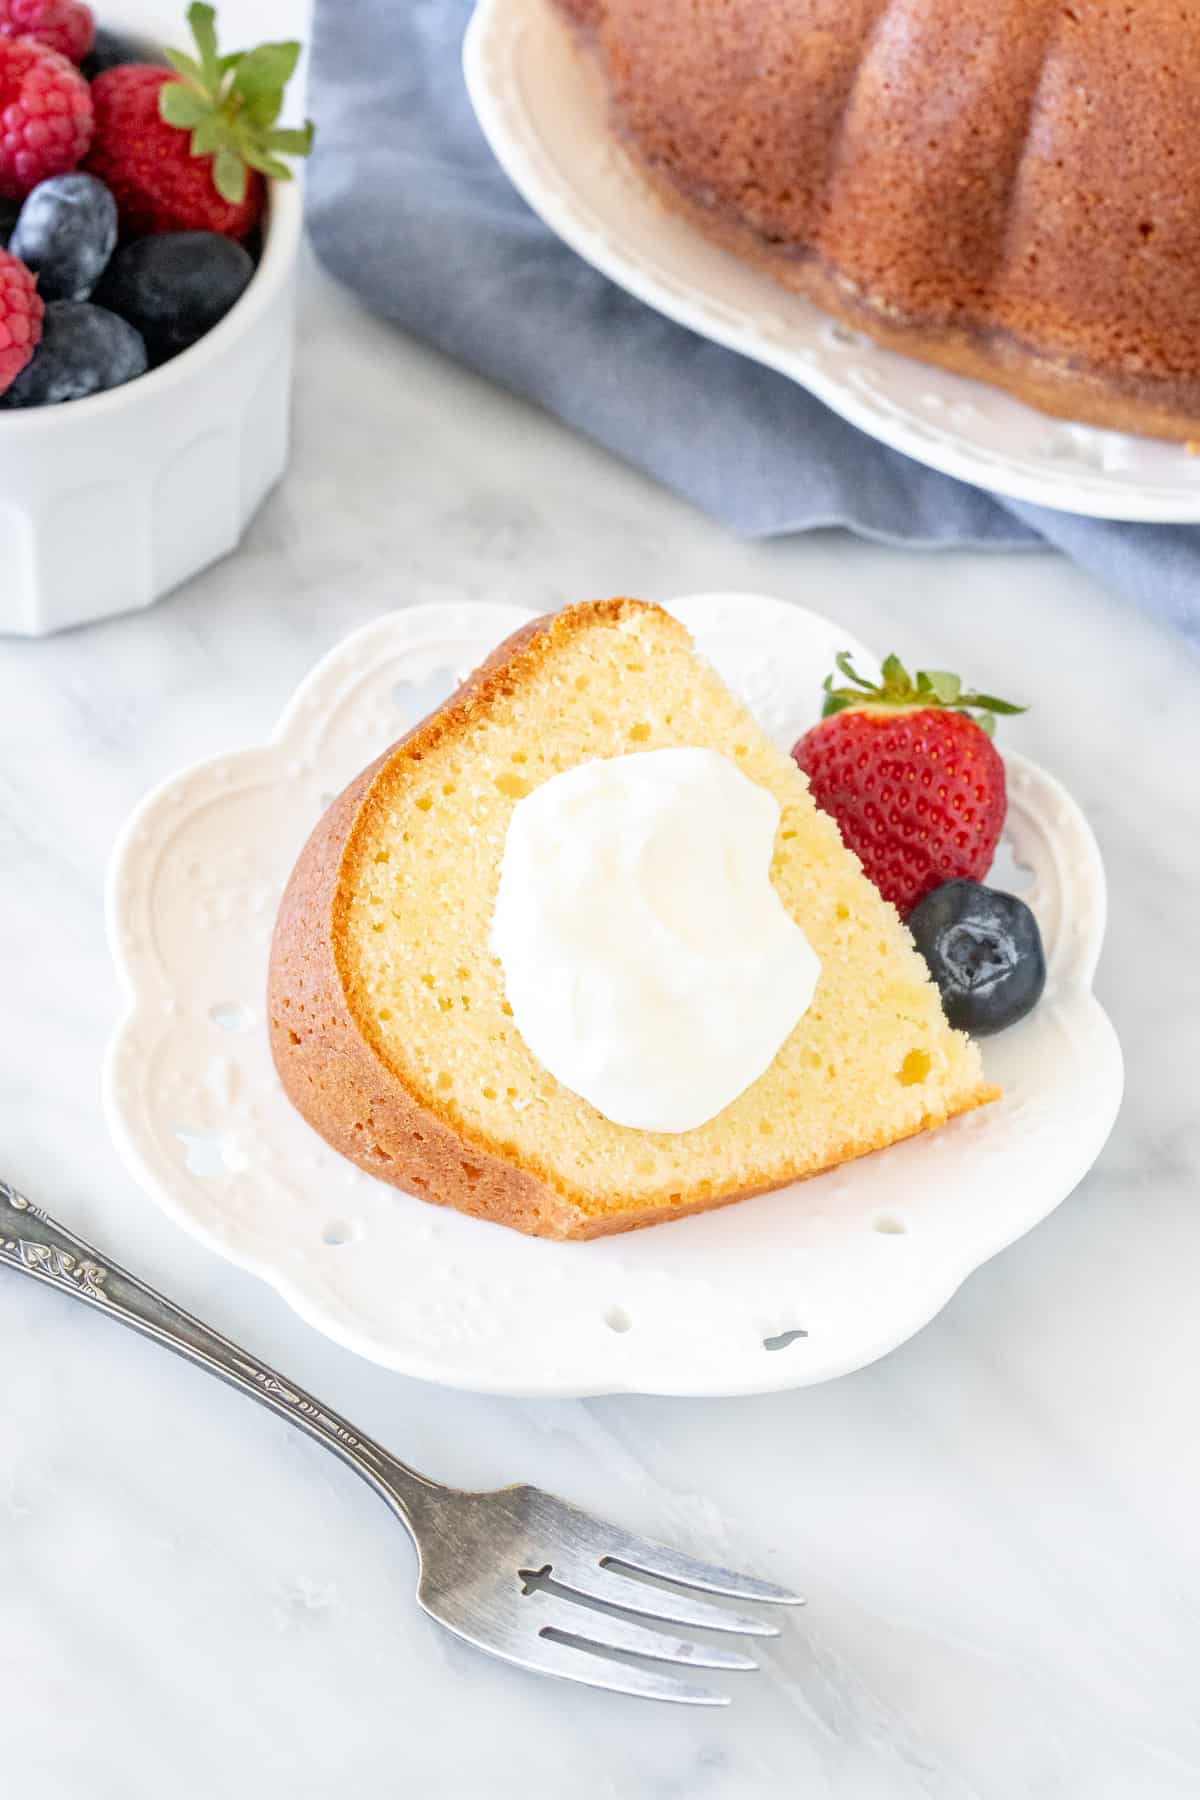 Slice of pound cake with whipped cream and berries